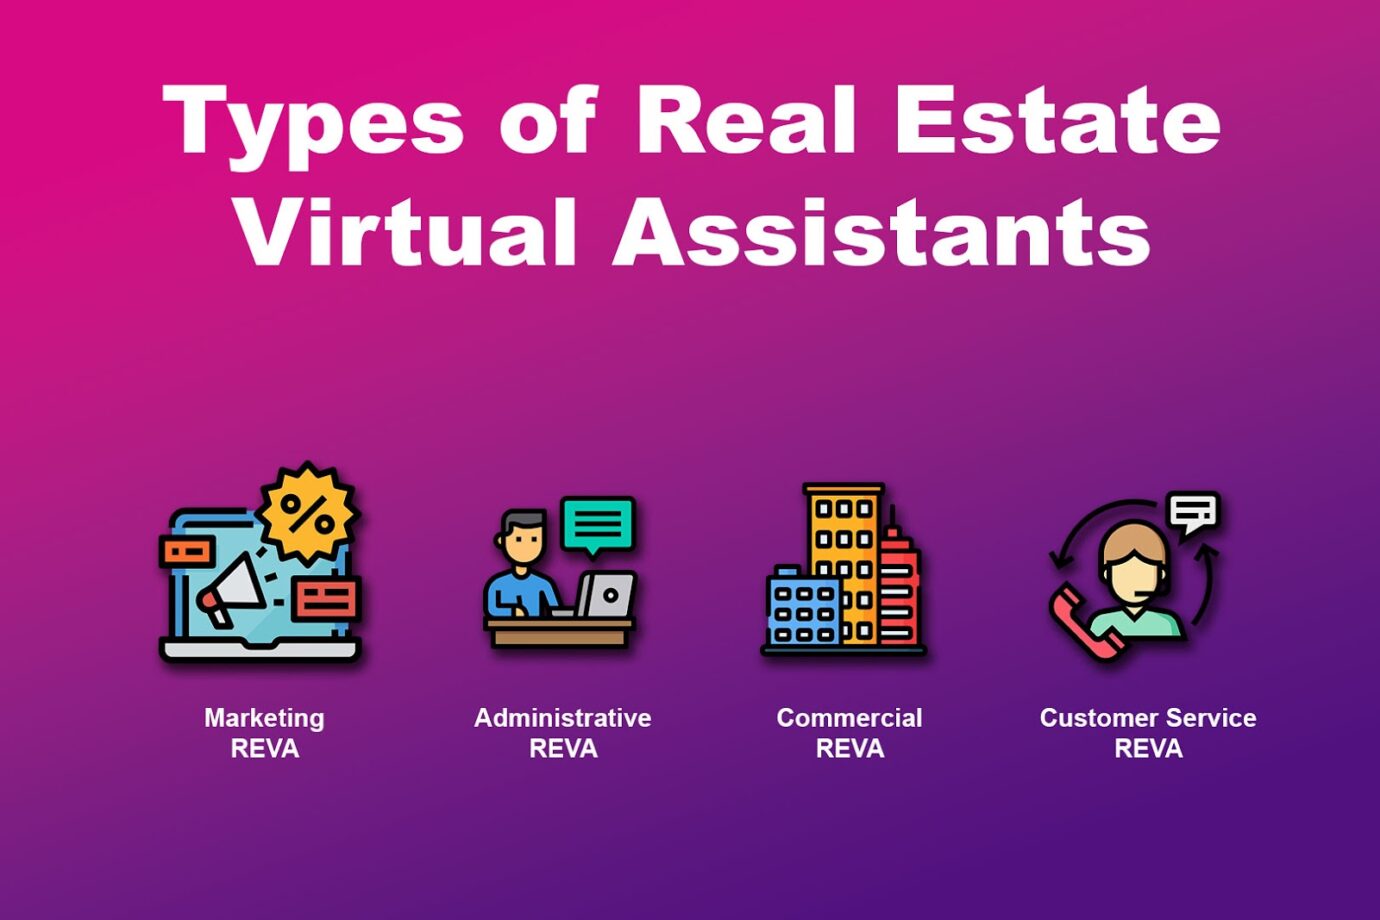 Types of Real Estate Virtual Assistants